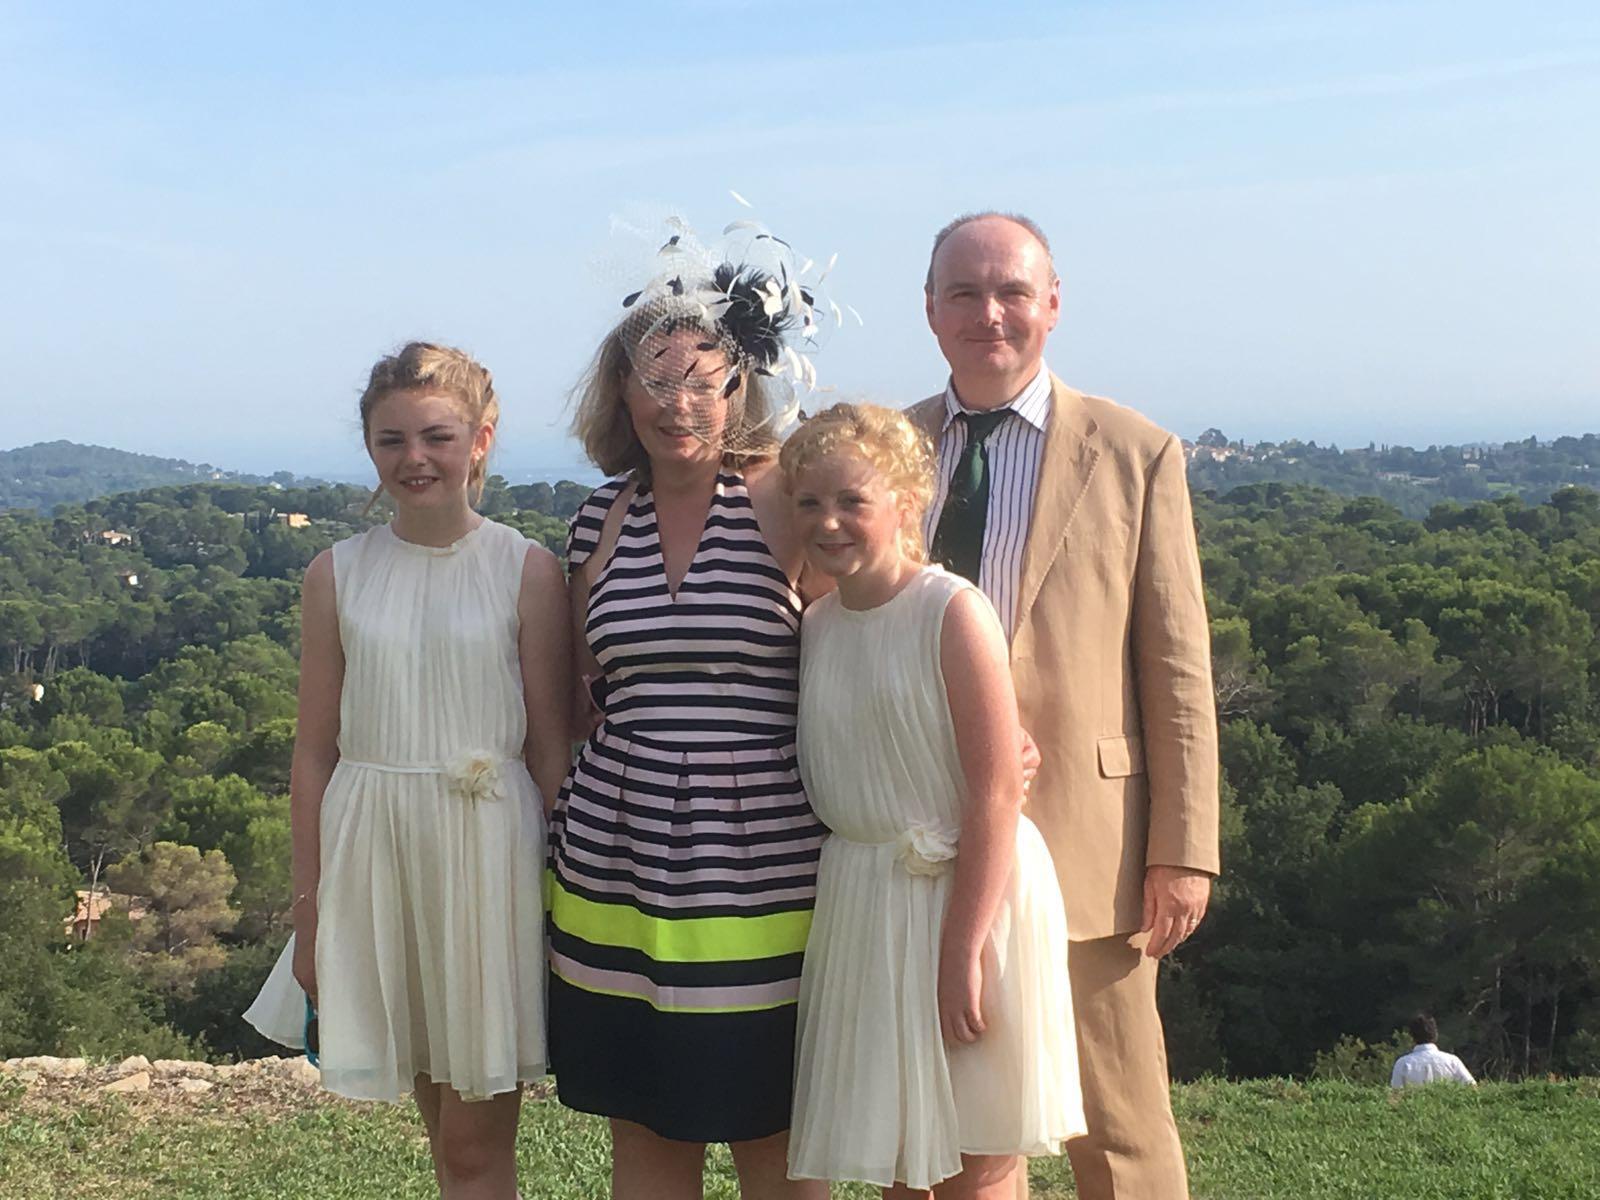 The Keen family were travelling to a wedding in France when Mr Keen was denied boarding